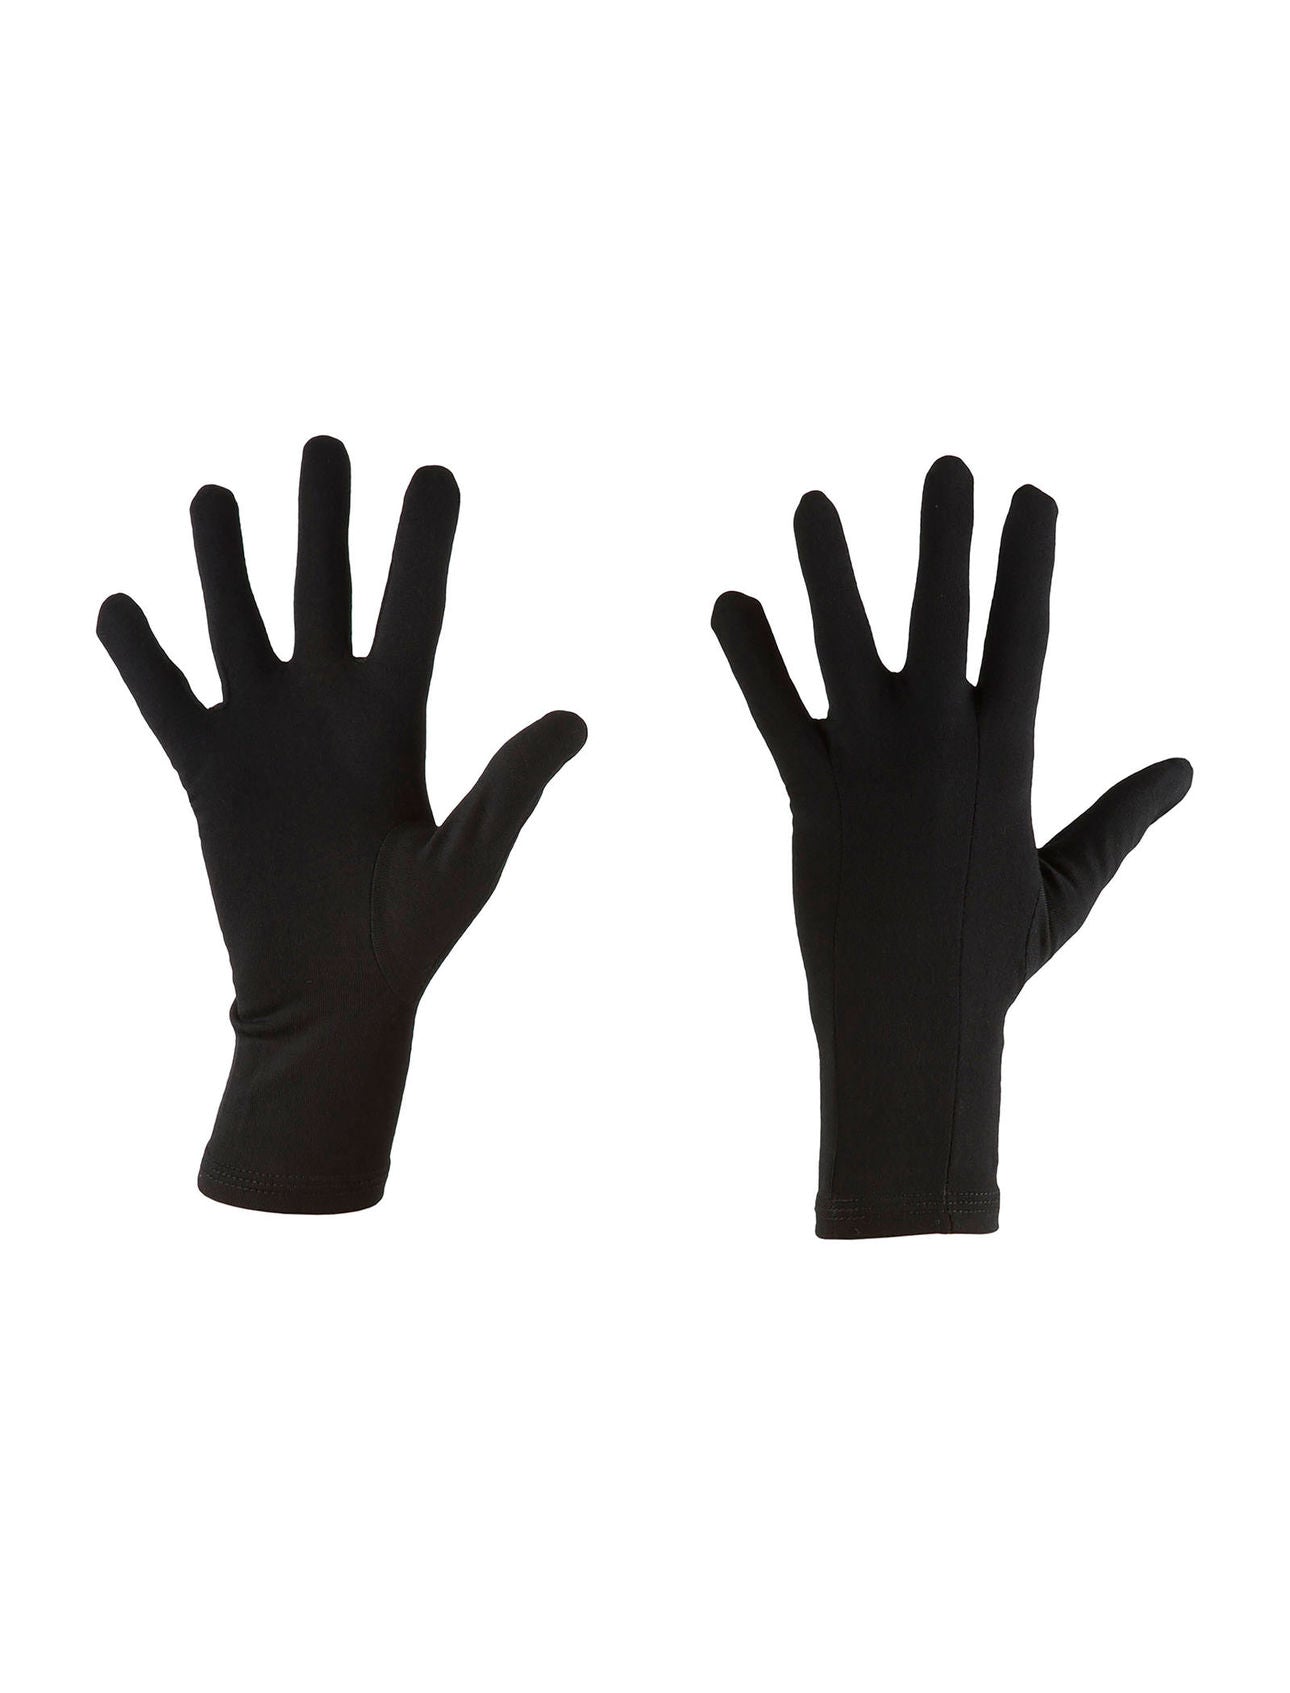 Oasis Glove Liners